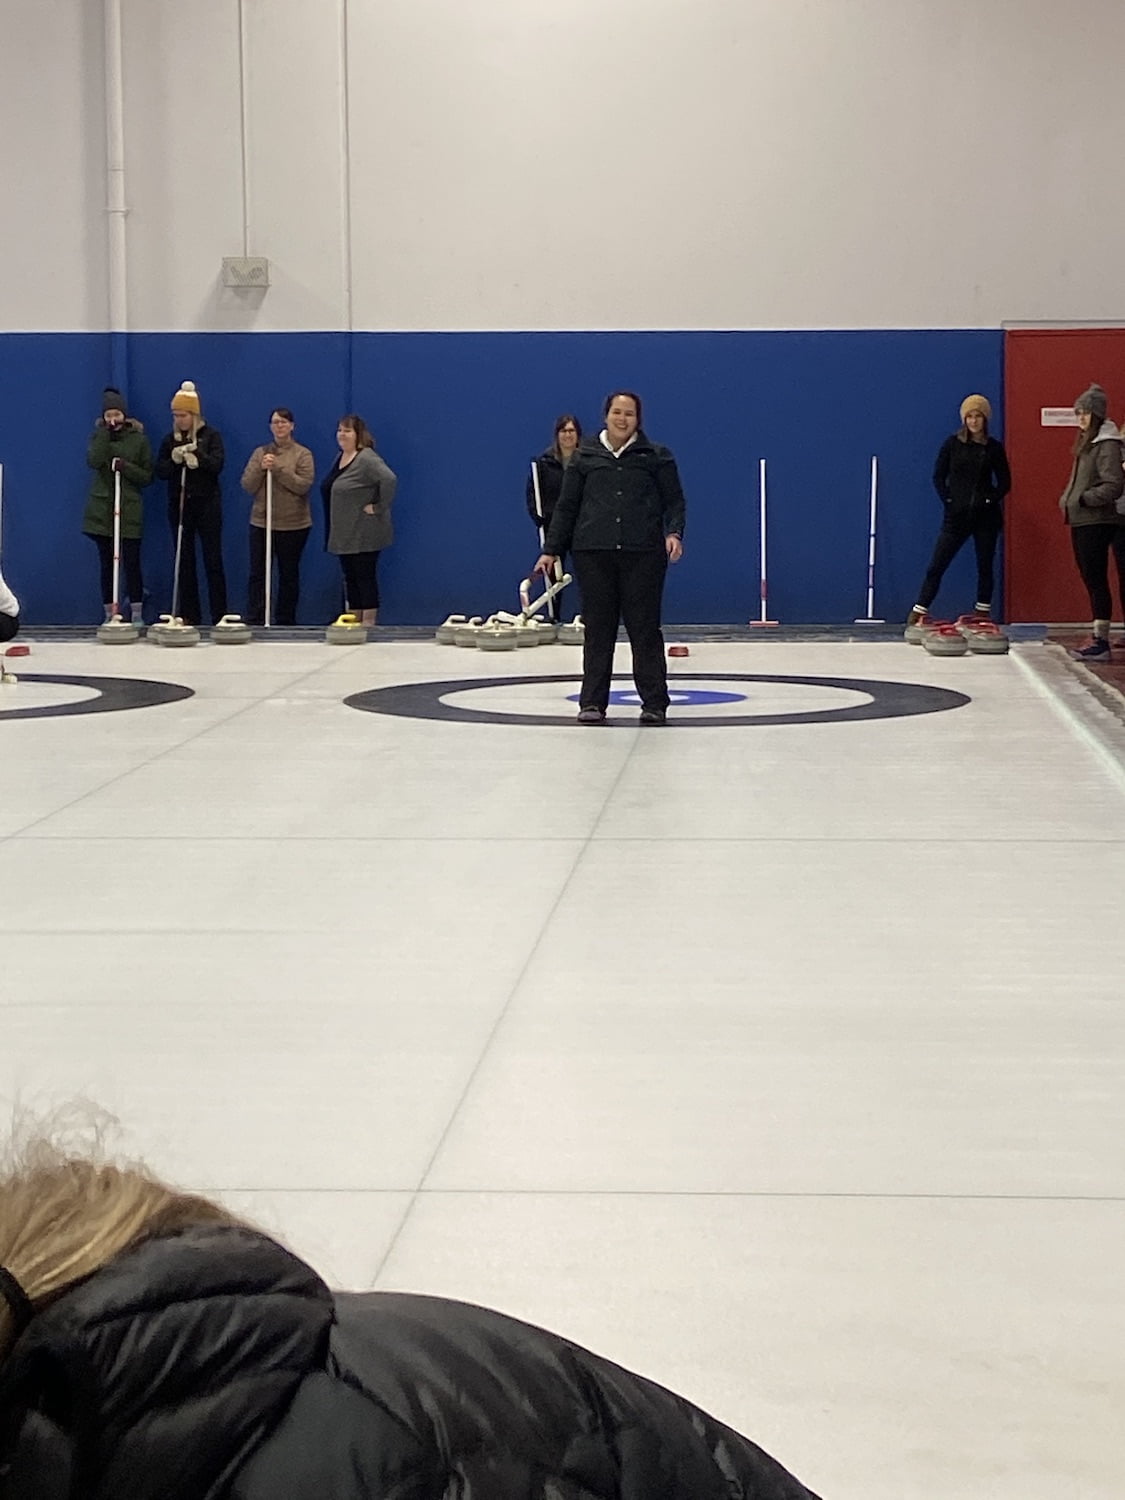 Woman Smiling After Throwing Curling Rock